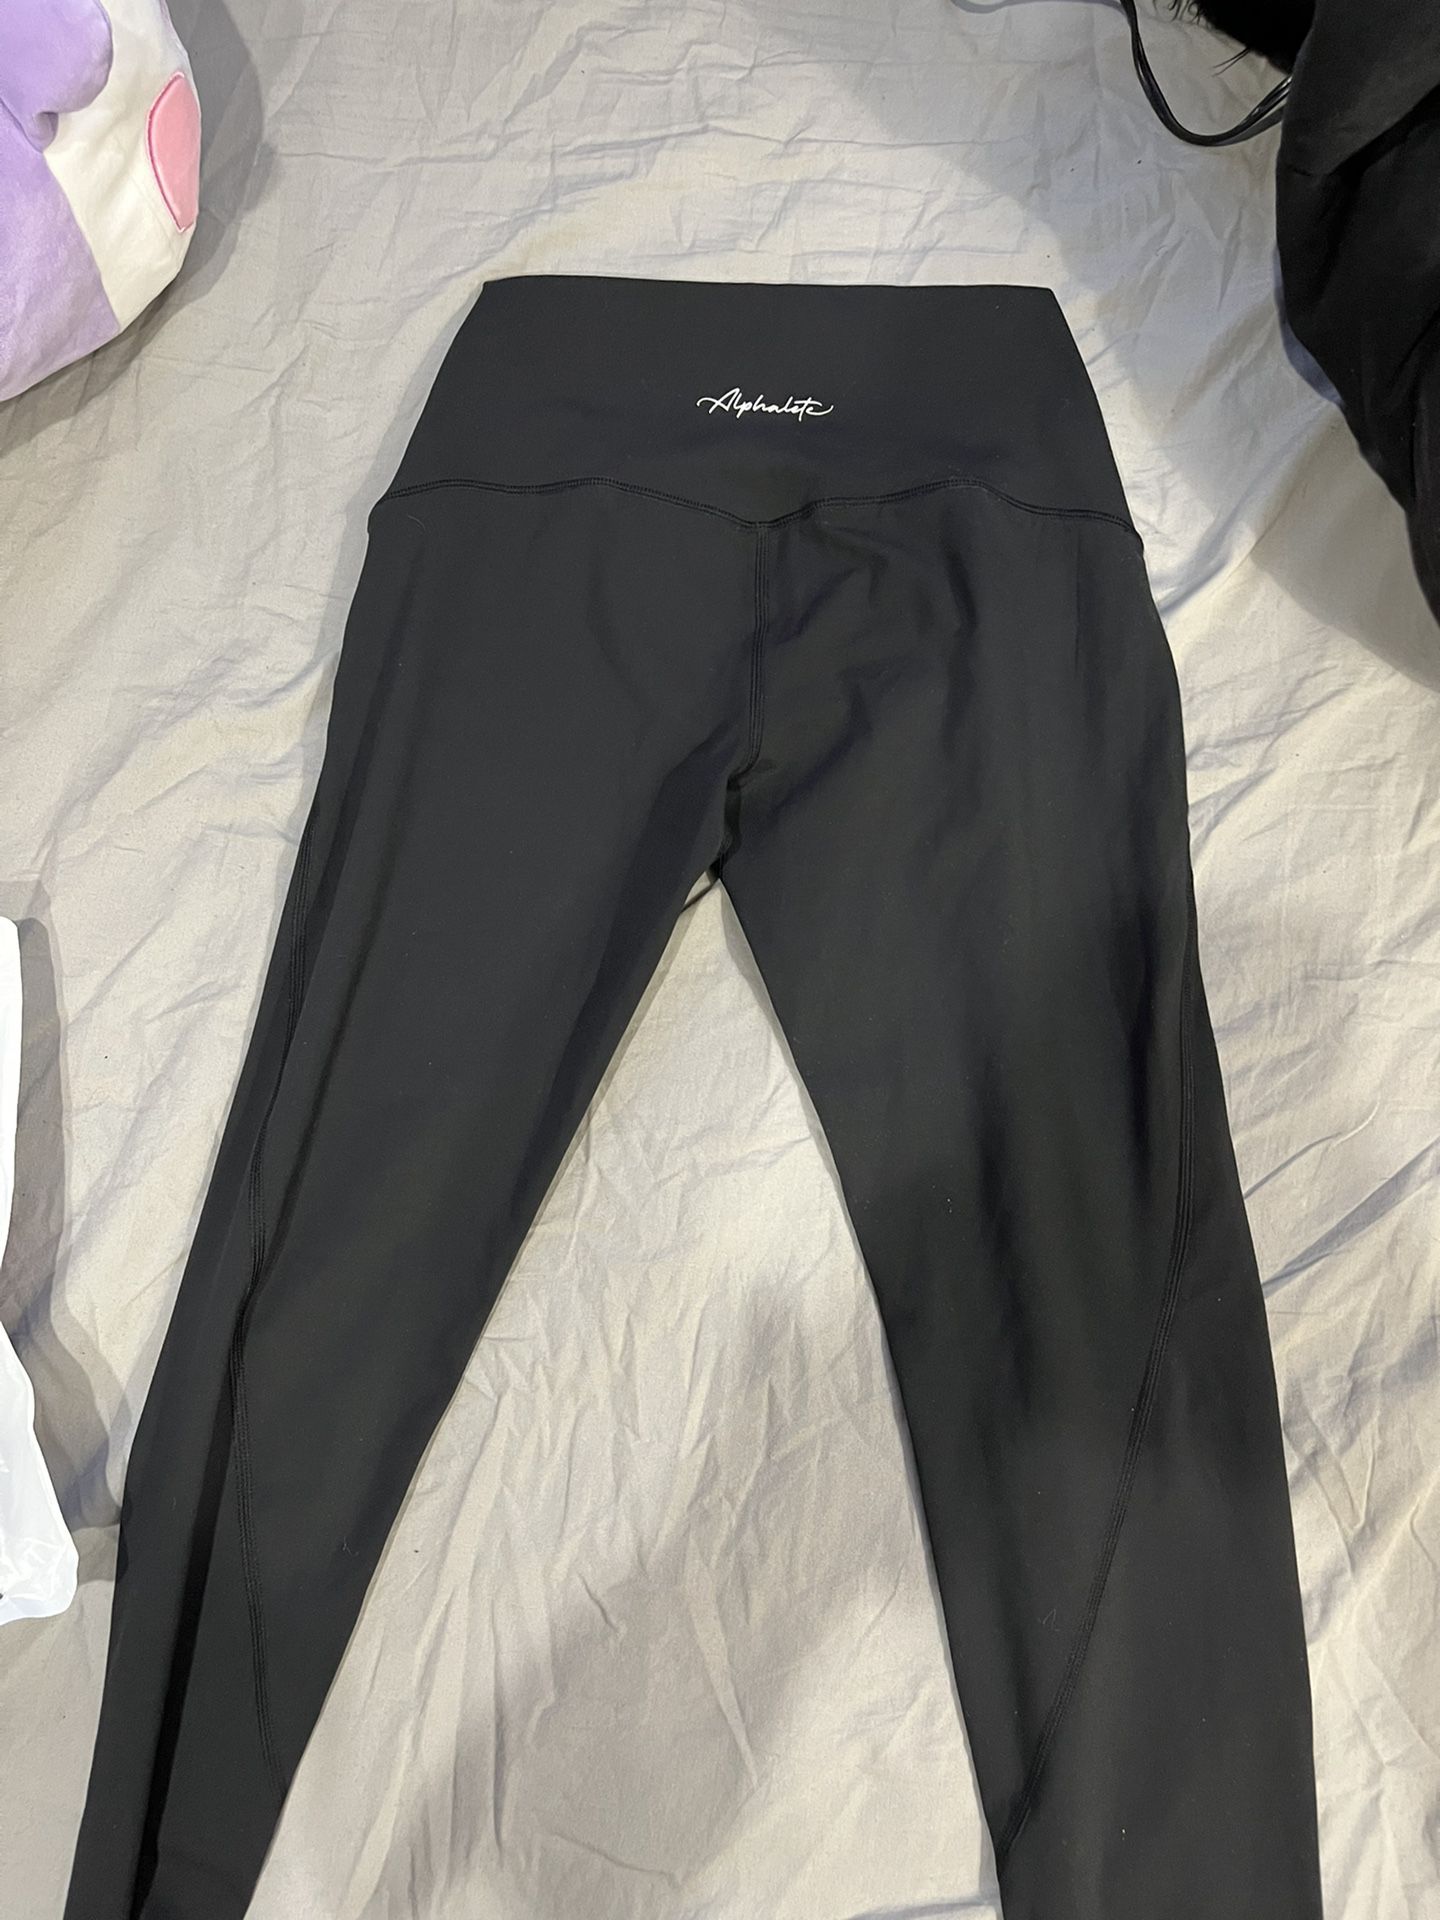 Alphalete Surface Elevation Legging for Sale in Irwindale, CA - OfferUp